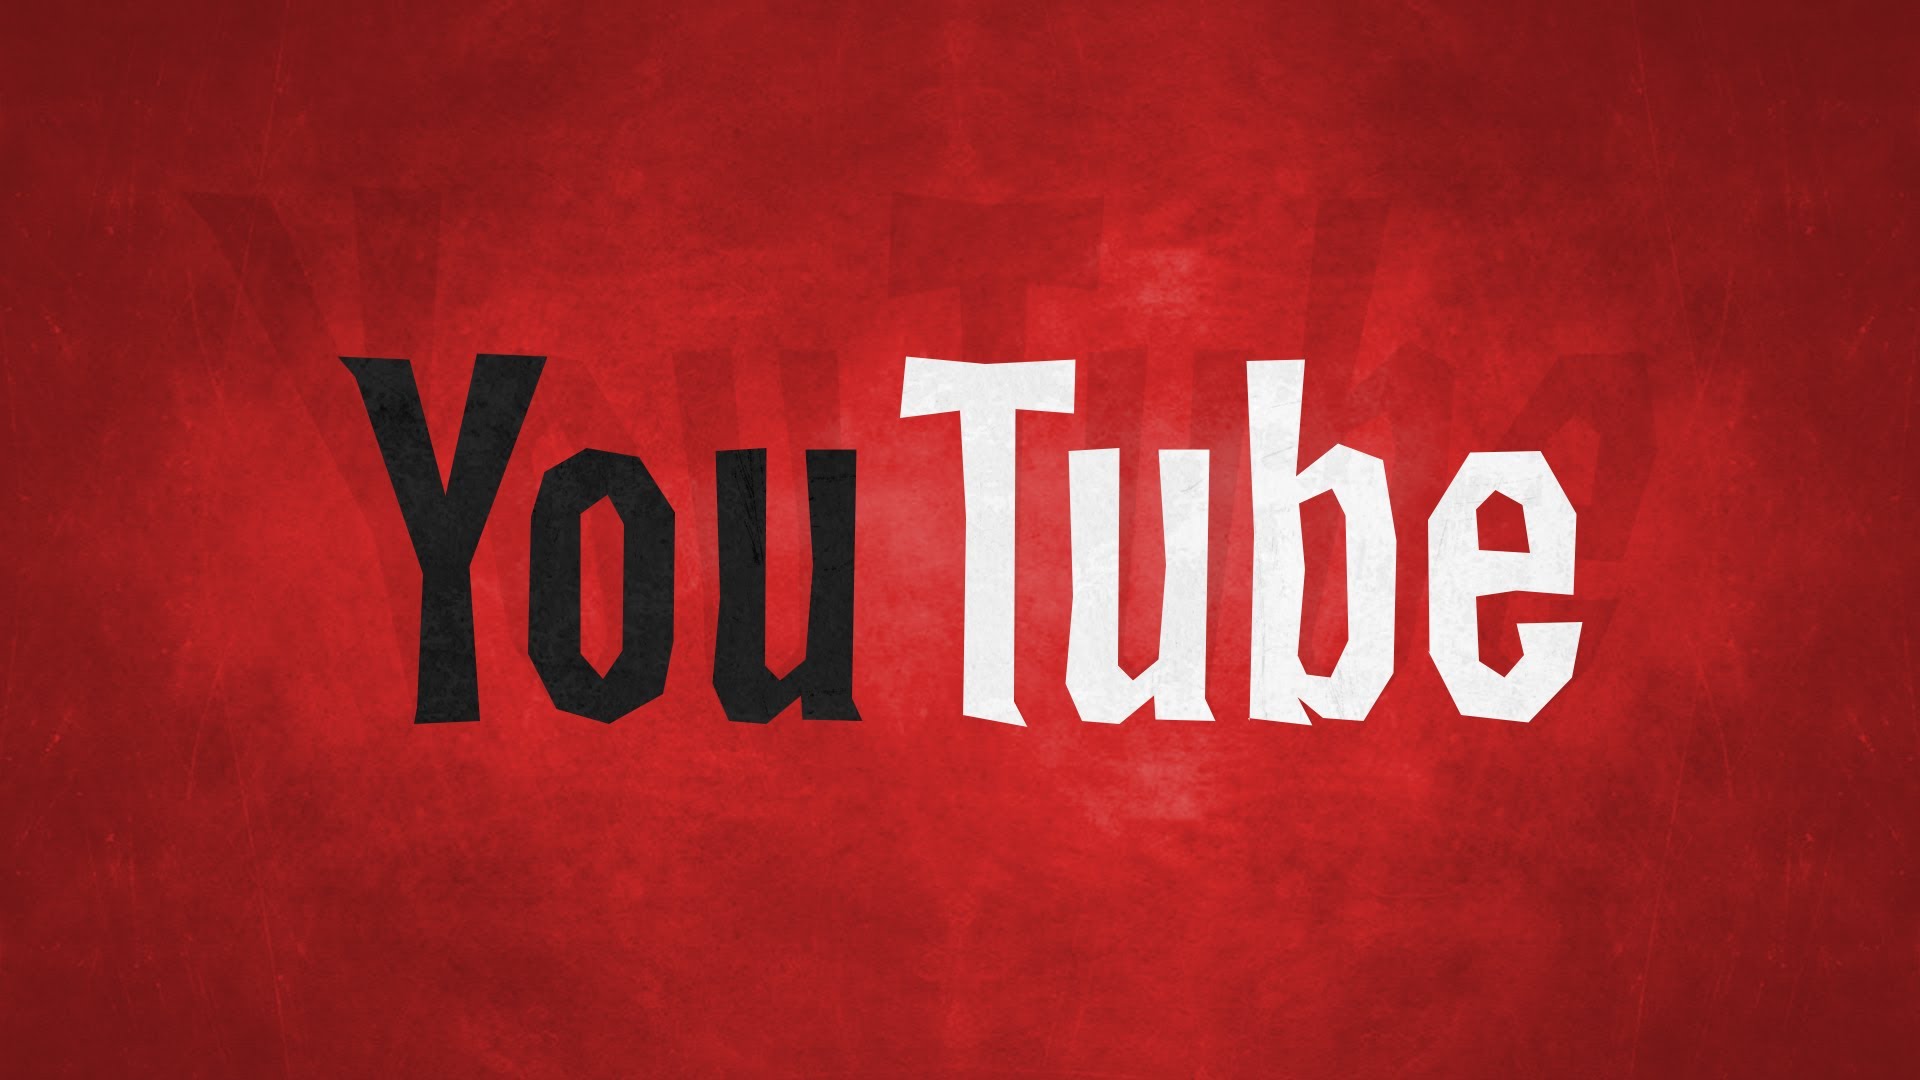 Buy YouTube video tutorials being an considerable technique to obtain a wonderful illustrious place over sociable mediaImprove you YouTube post thumbnail image